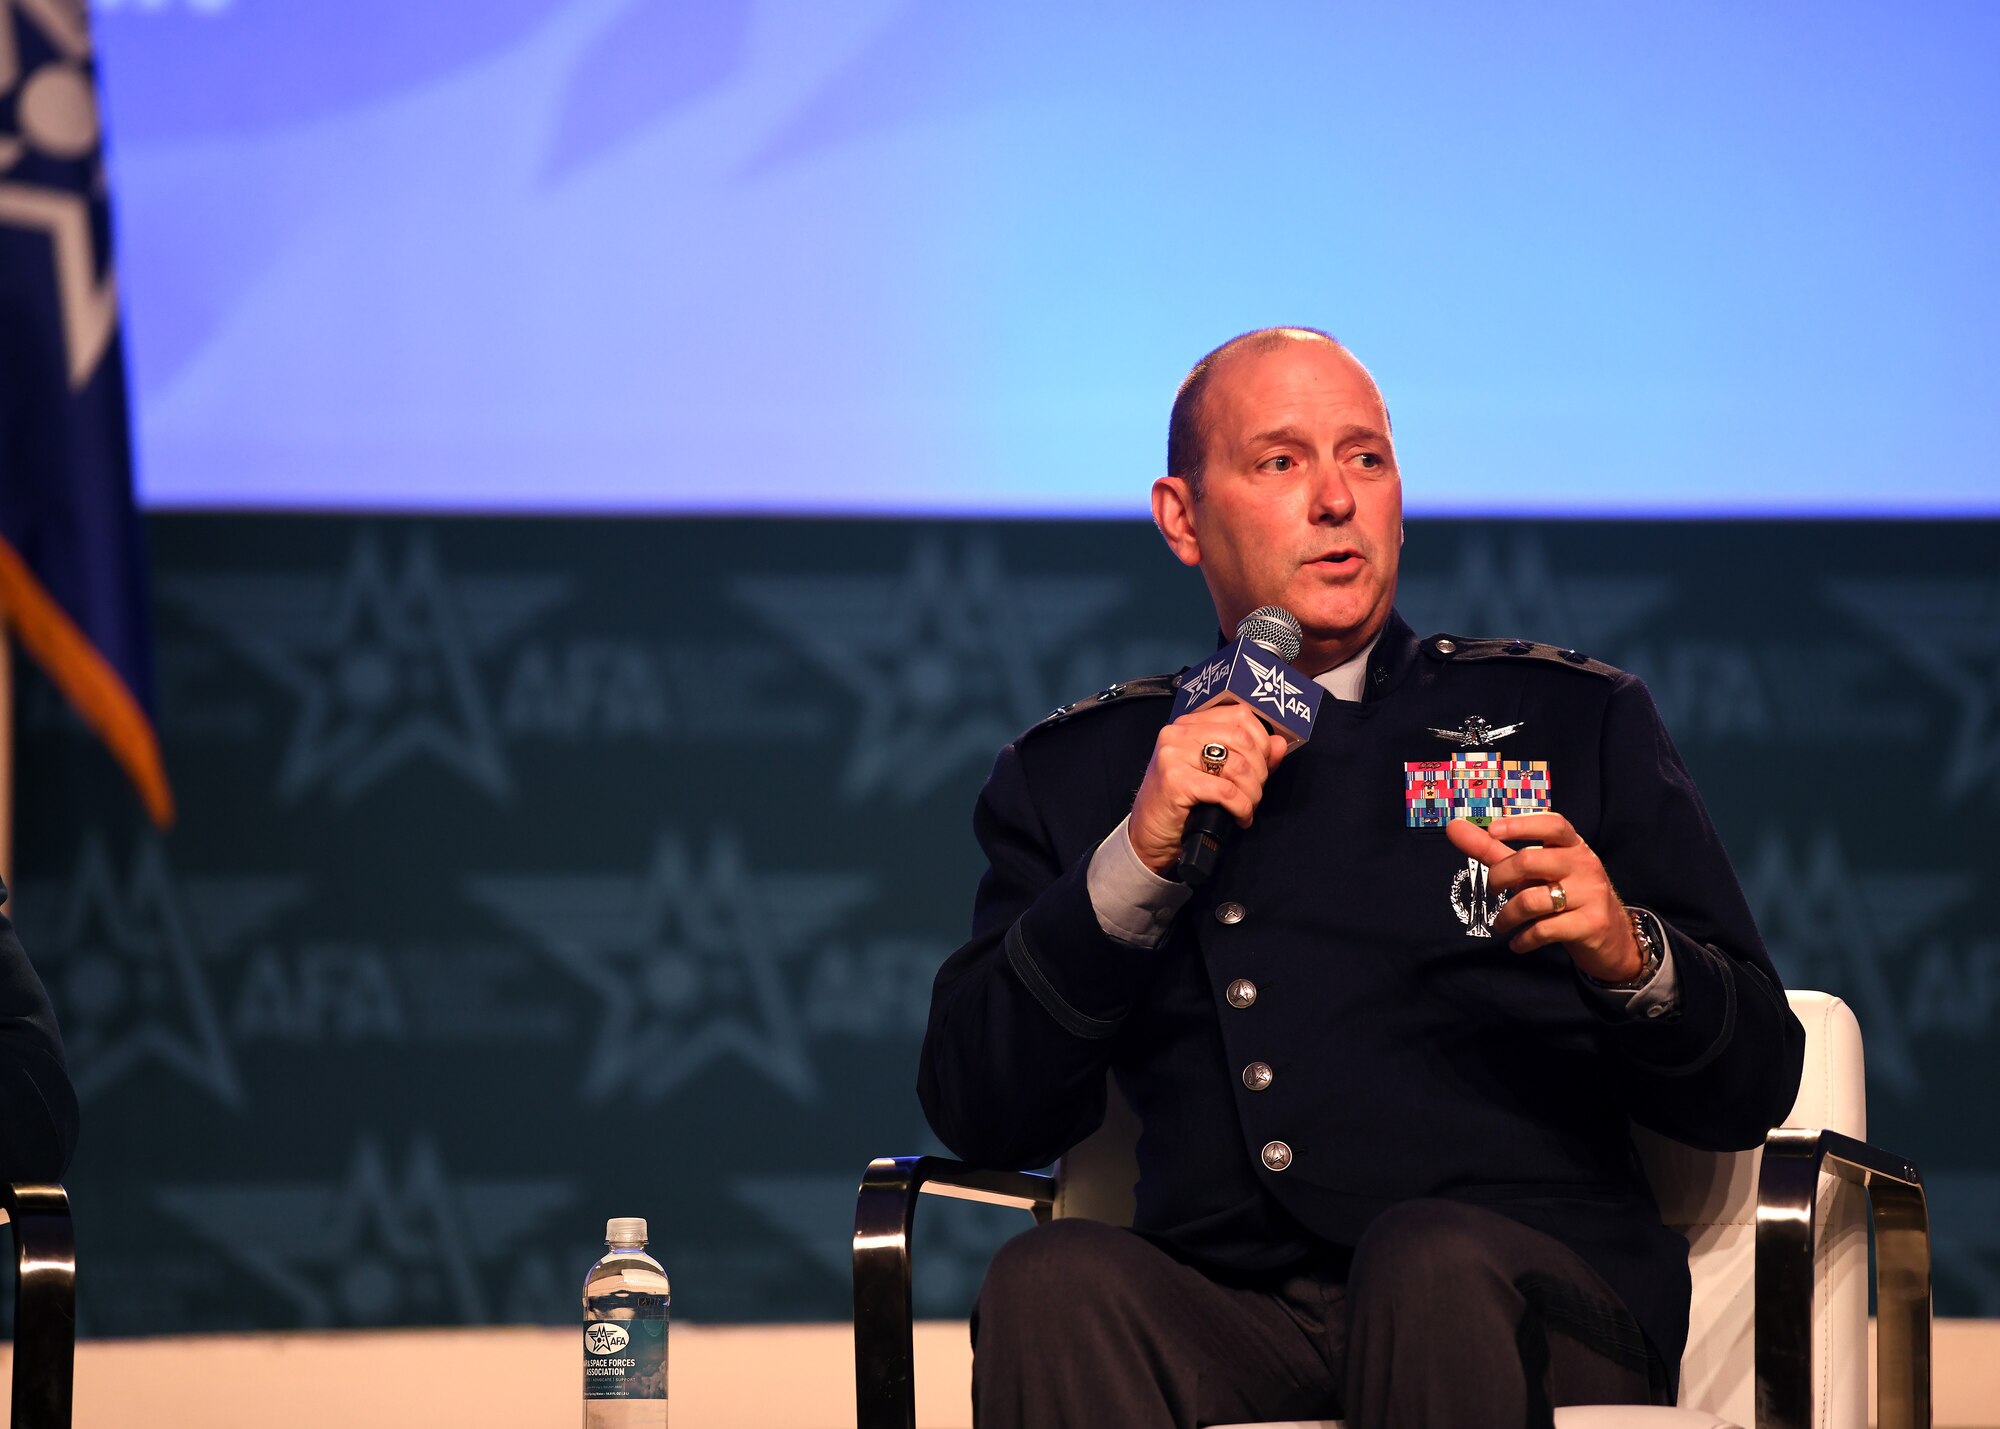 Maj. Gen. Douglas A. Schiess, Combined Force Space Component Command commander and Space Operations Command vice commander, answers a question during a panel at the Air and Space Forces Association's Air Space and Cyber Conference in National Harbor, M.D. September 12, 2023. (U.S. Air Force photo by Tech. Sgt. Stephanie Serrano)